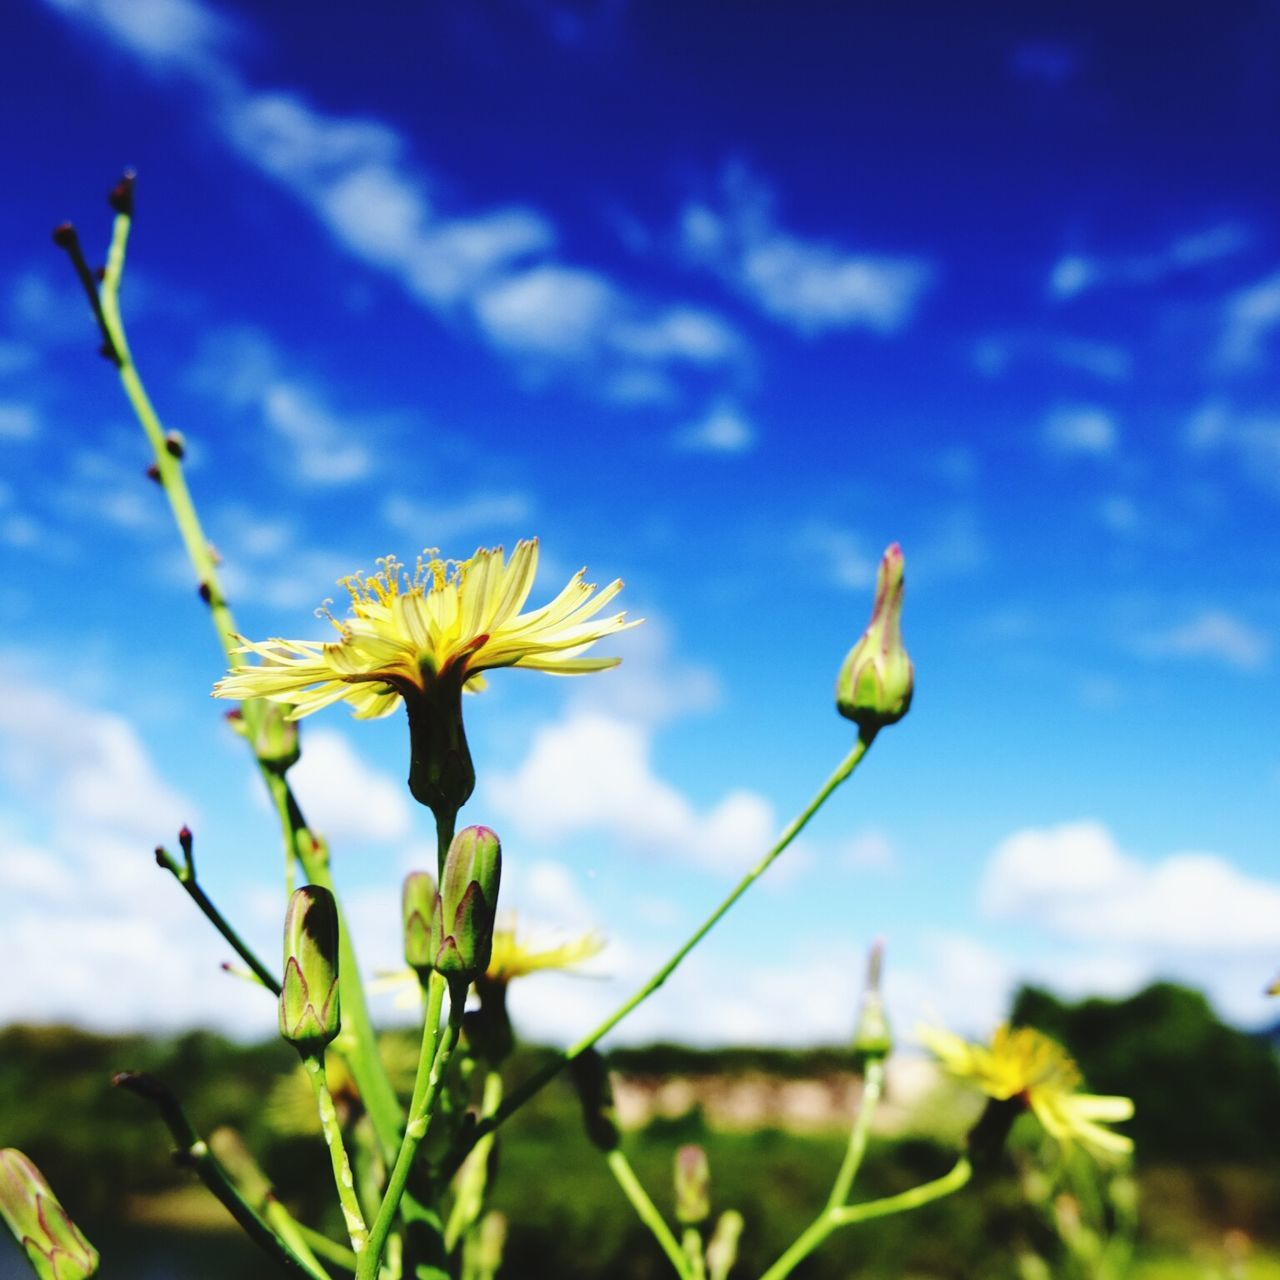 flower, freshness, growth, fragility, yellow, sky, focus on foreground, beauty in nature, plant, stem, nature, flower head, petal, blooming, close-up, blue, bud, field, low angle view, cloud